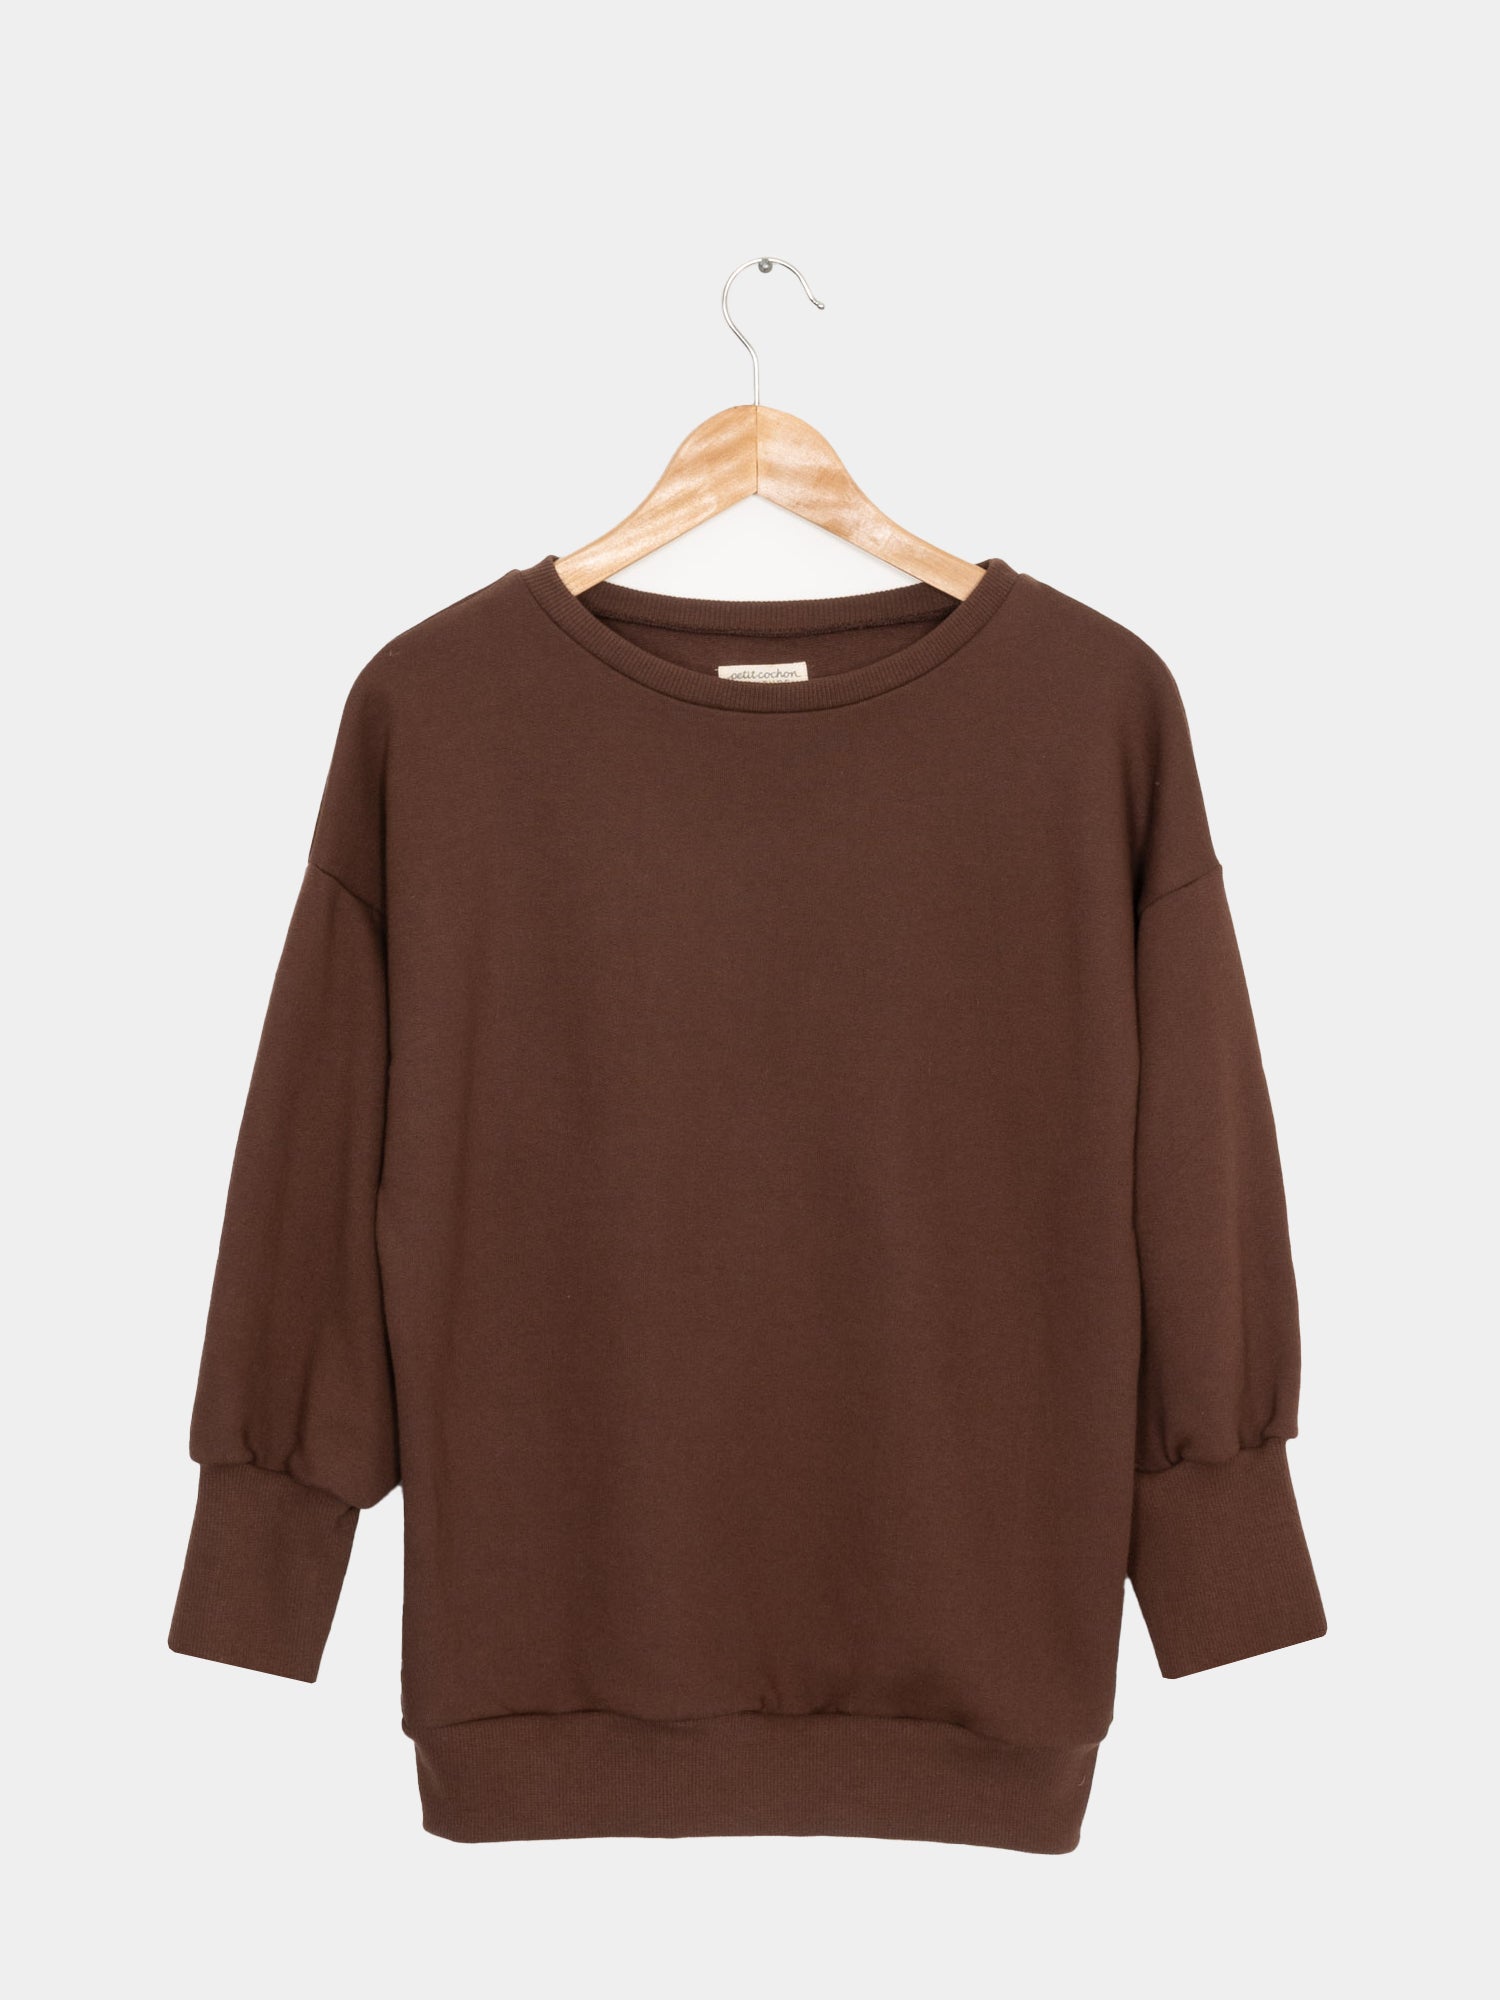 Pump sweater made from organic cotton - chocolate